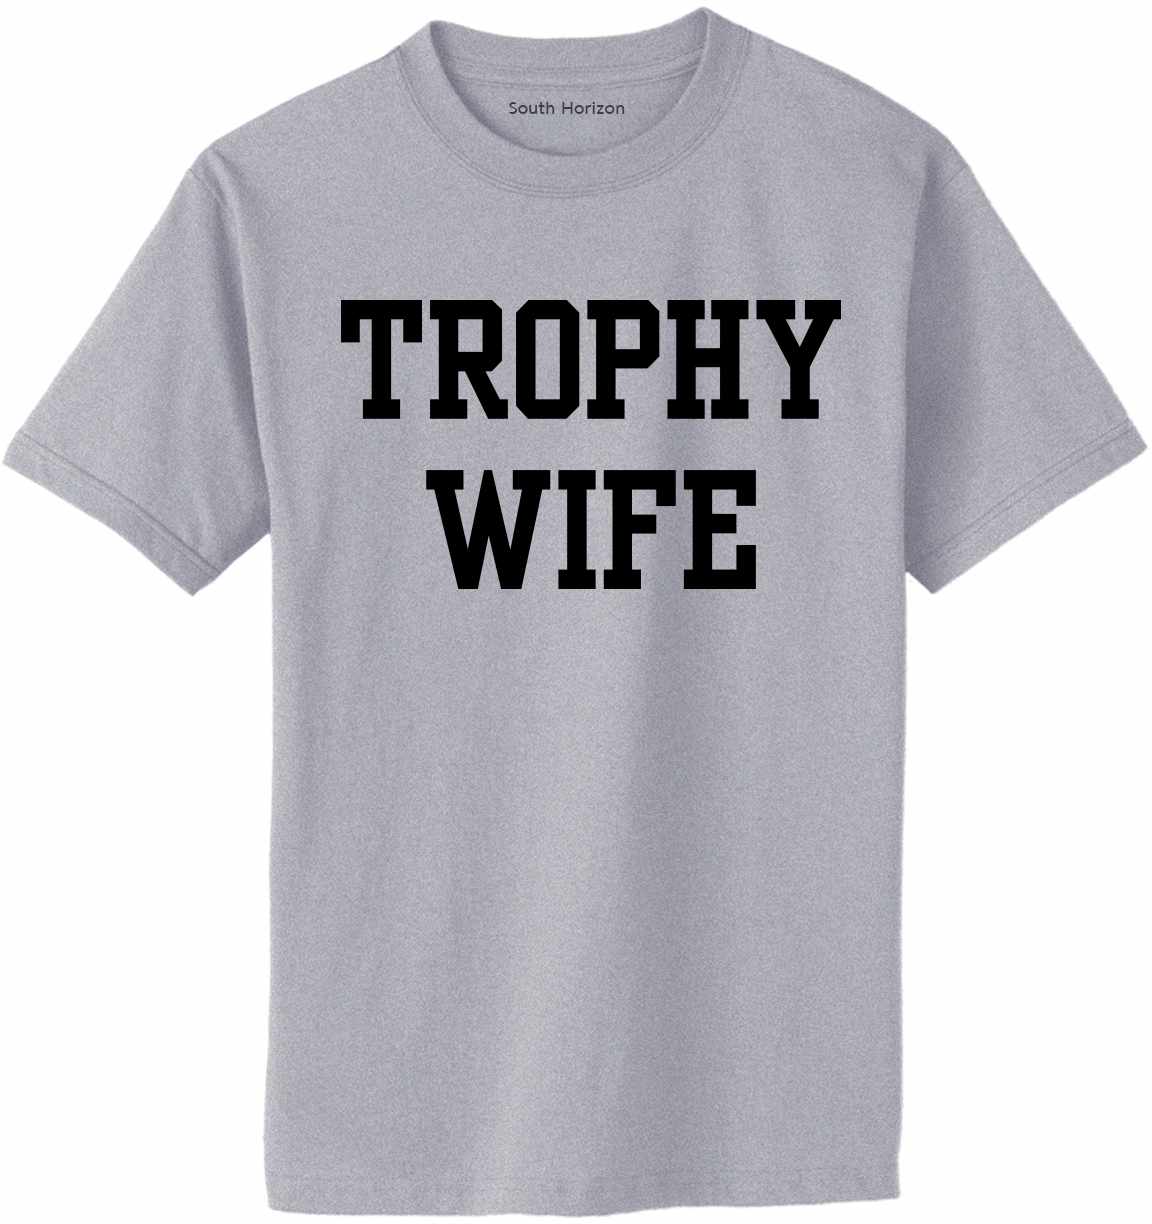 Trophy Wife on Adult T-Shirt (#1308-1)